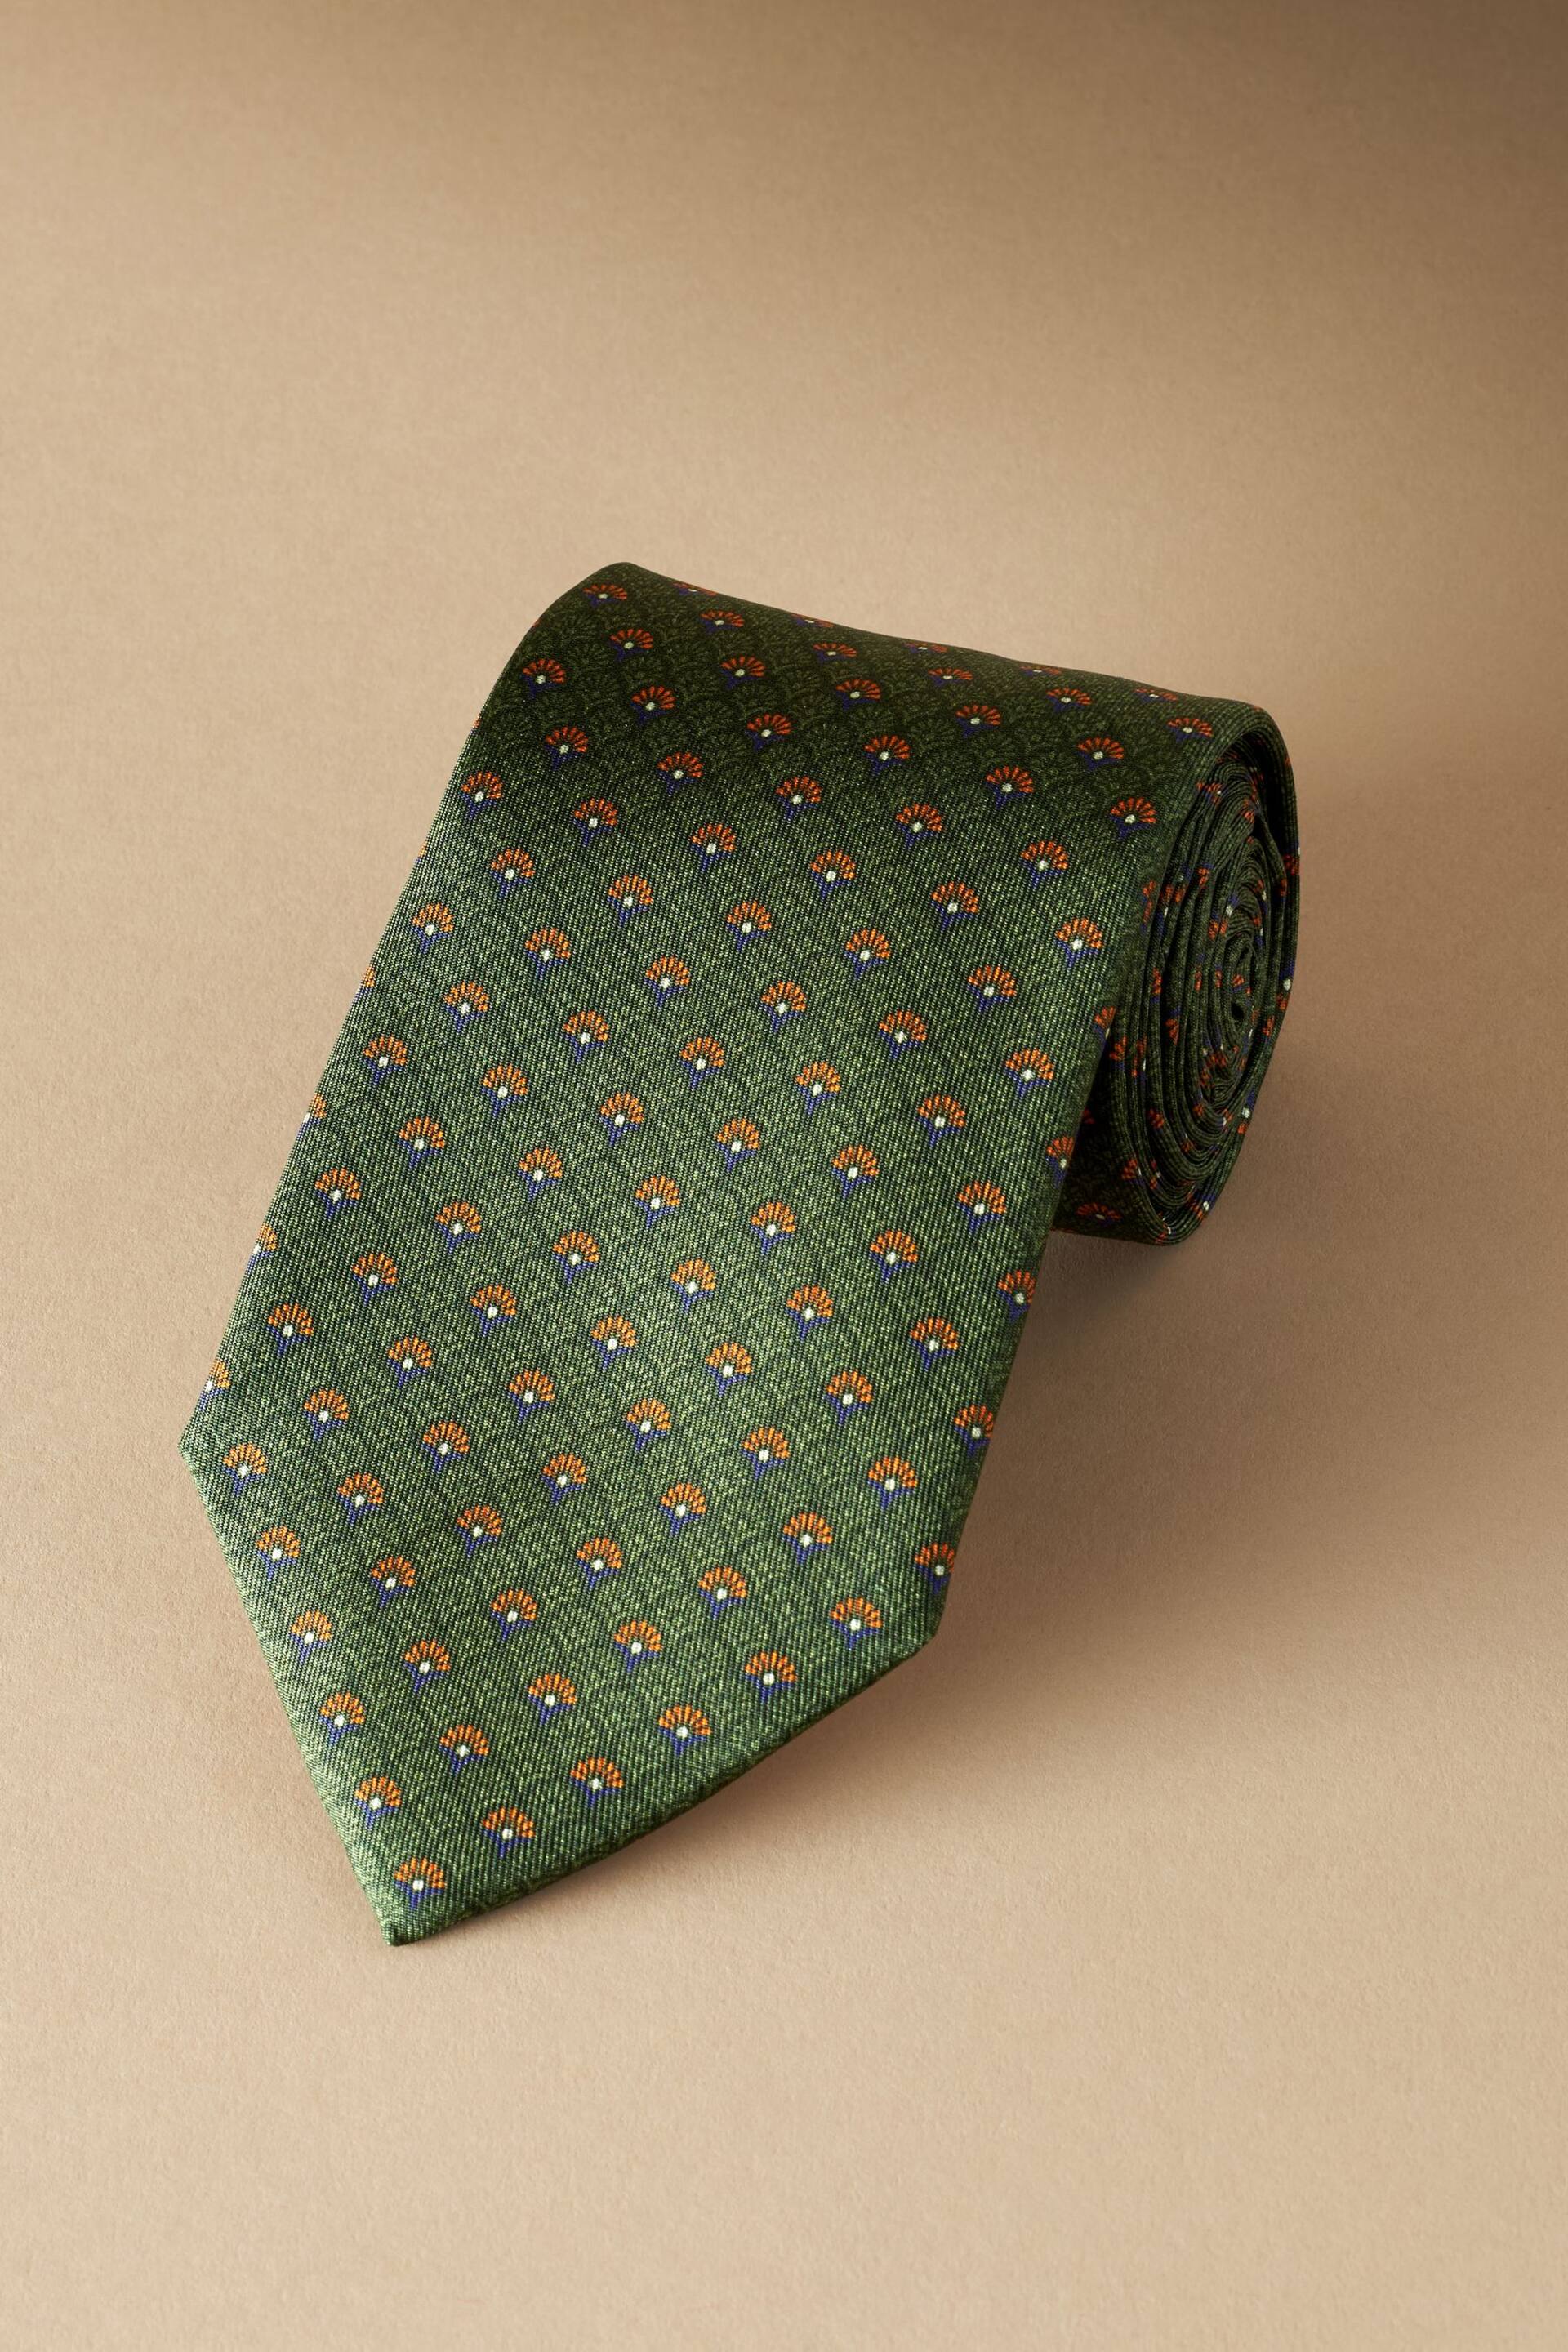 Olive Green Geometric Signature Made In Italy Design Tie - Image 1 of 3